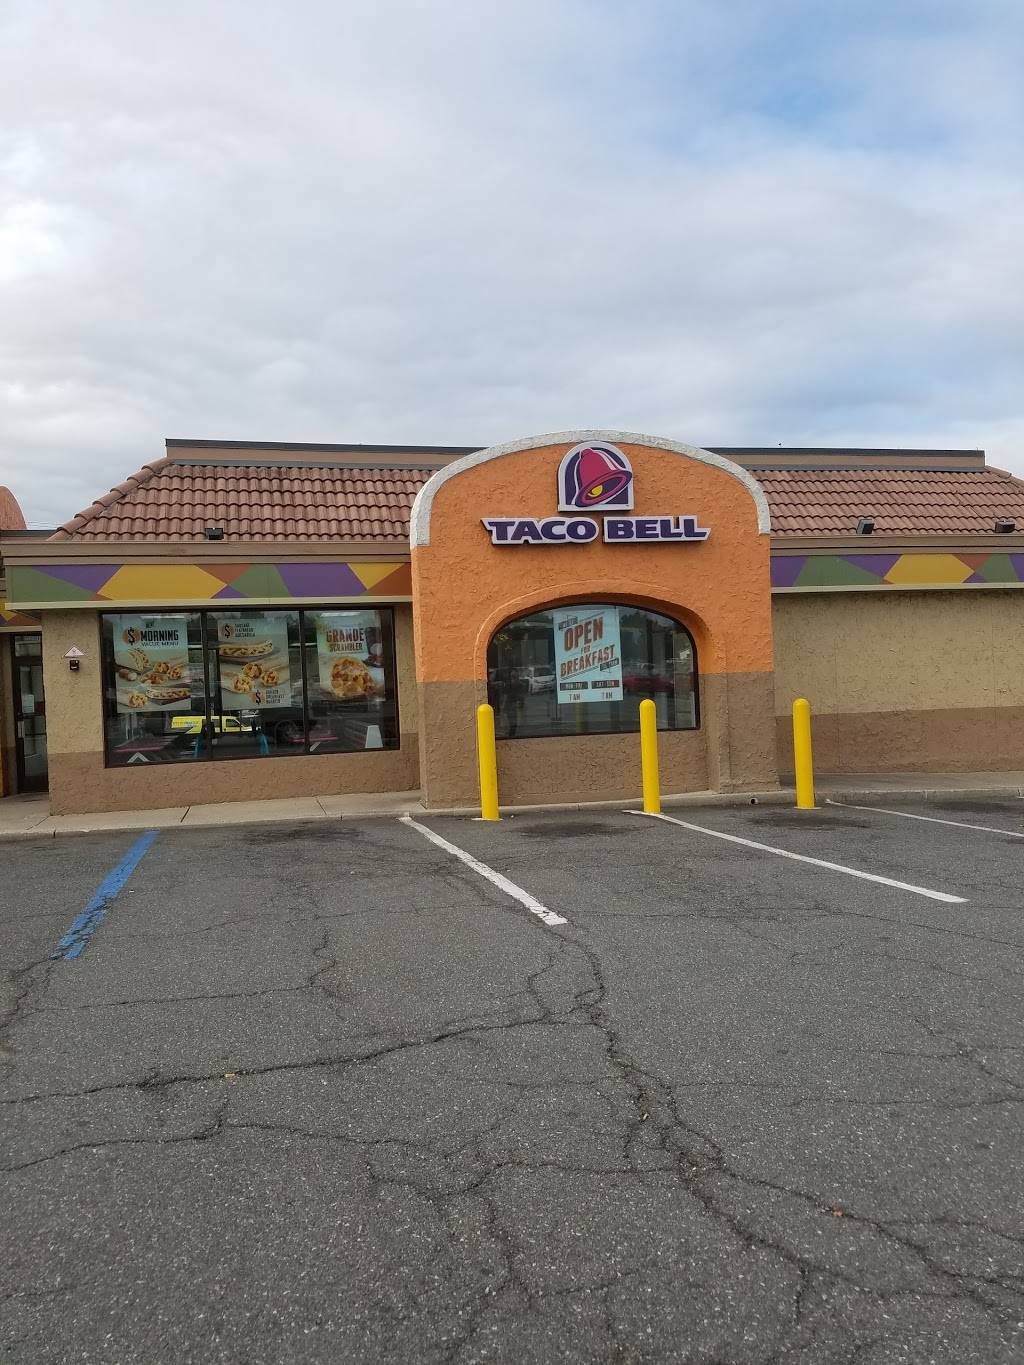 Taco Bell | meal takeaway | 366 Convery Blvd, Perth Amboy, NJ 08861, USA | 7328261774 OR +1 732-826-1774